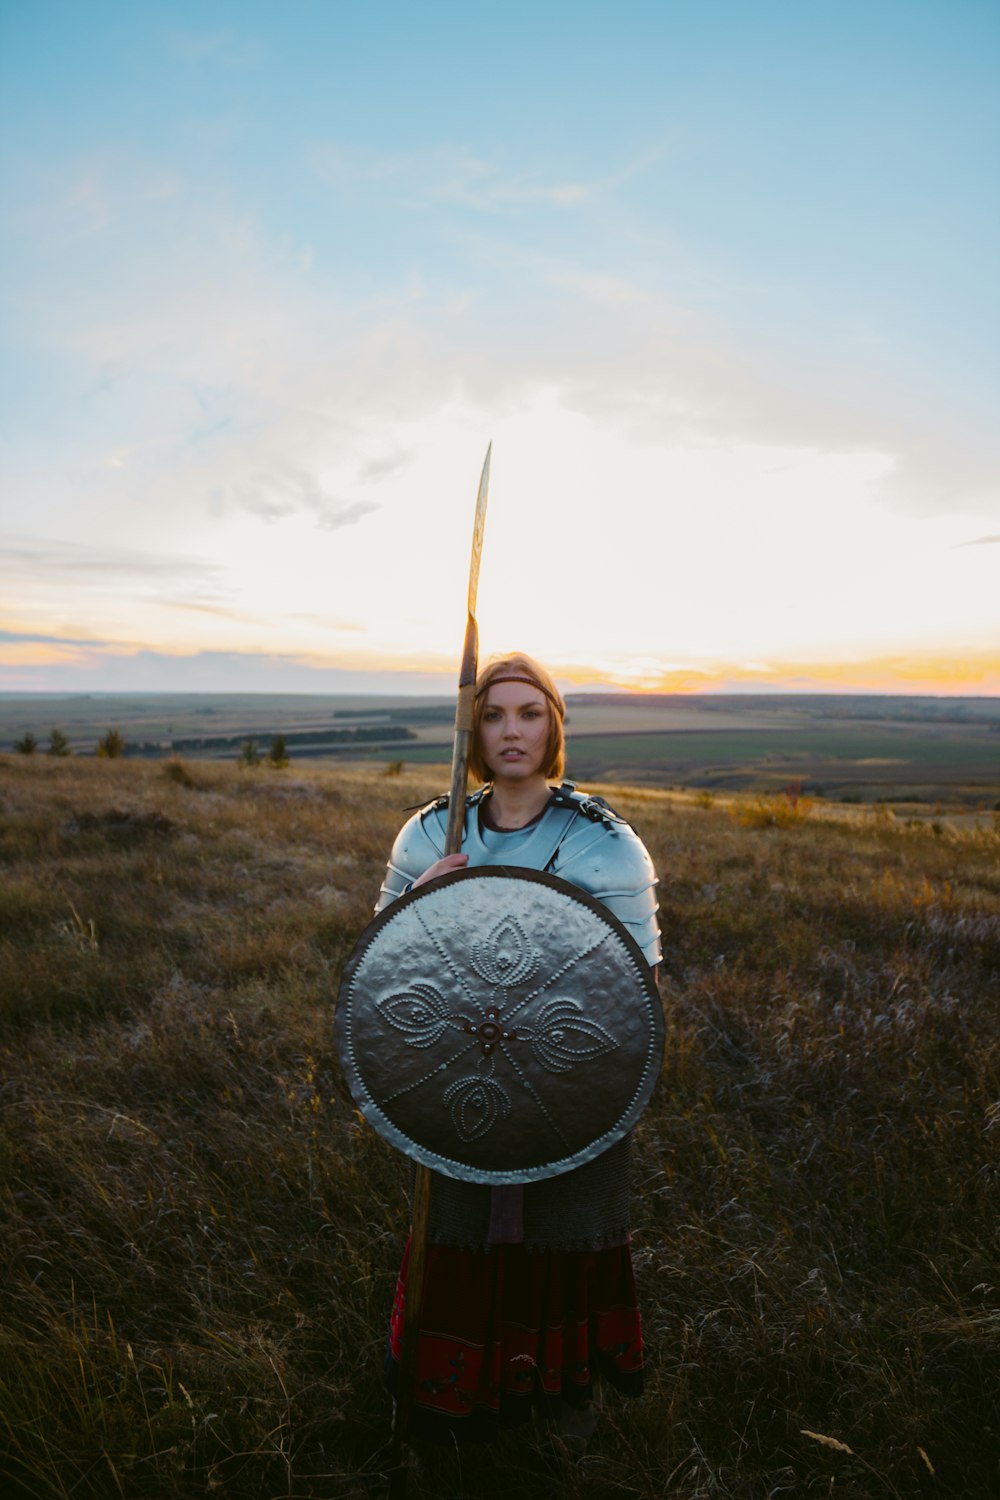 a woman holding a sword and shield in a field